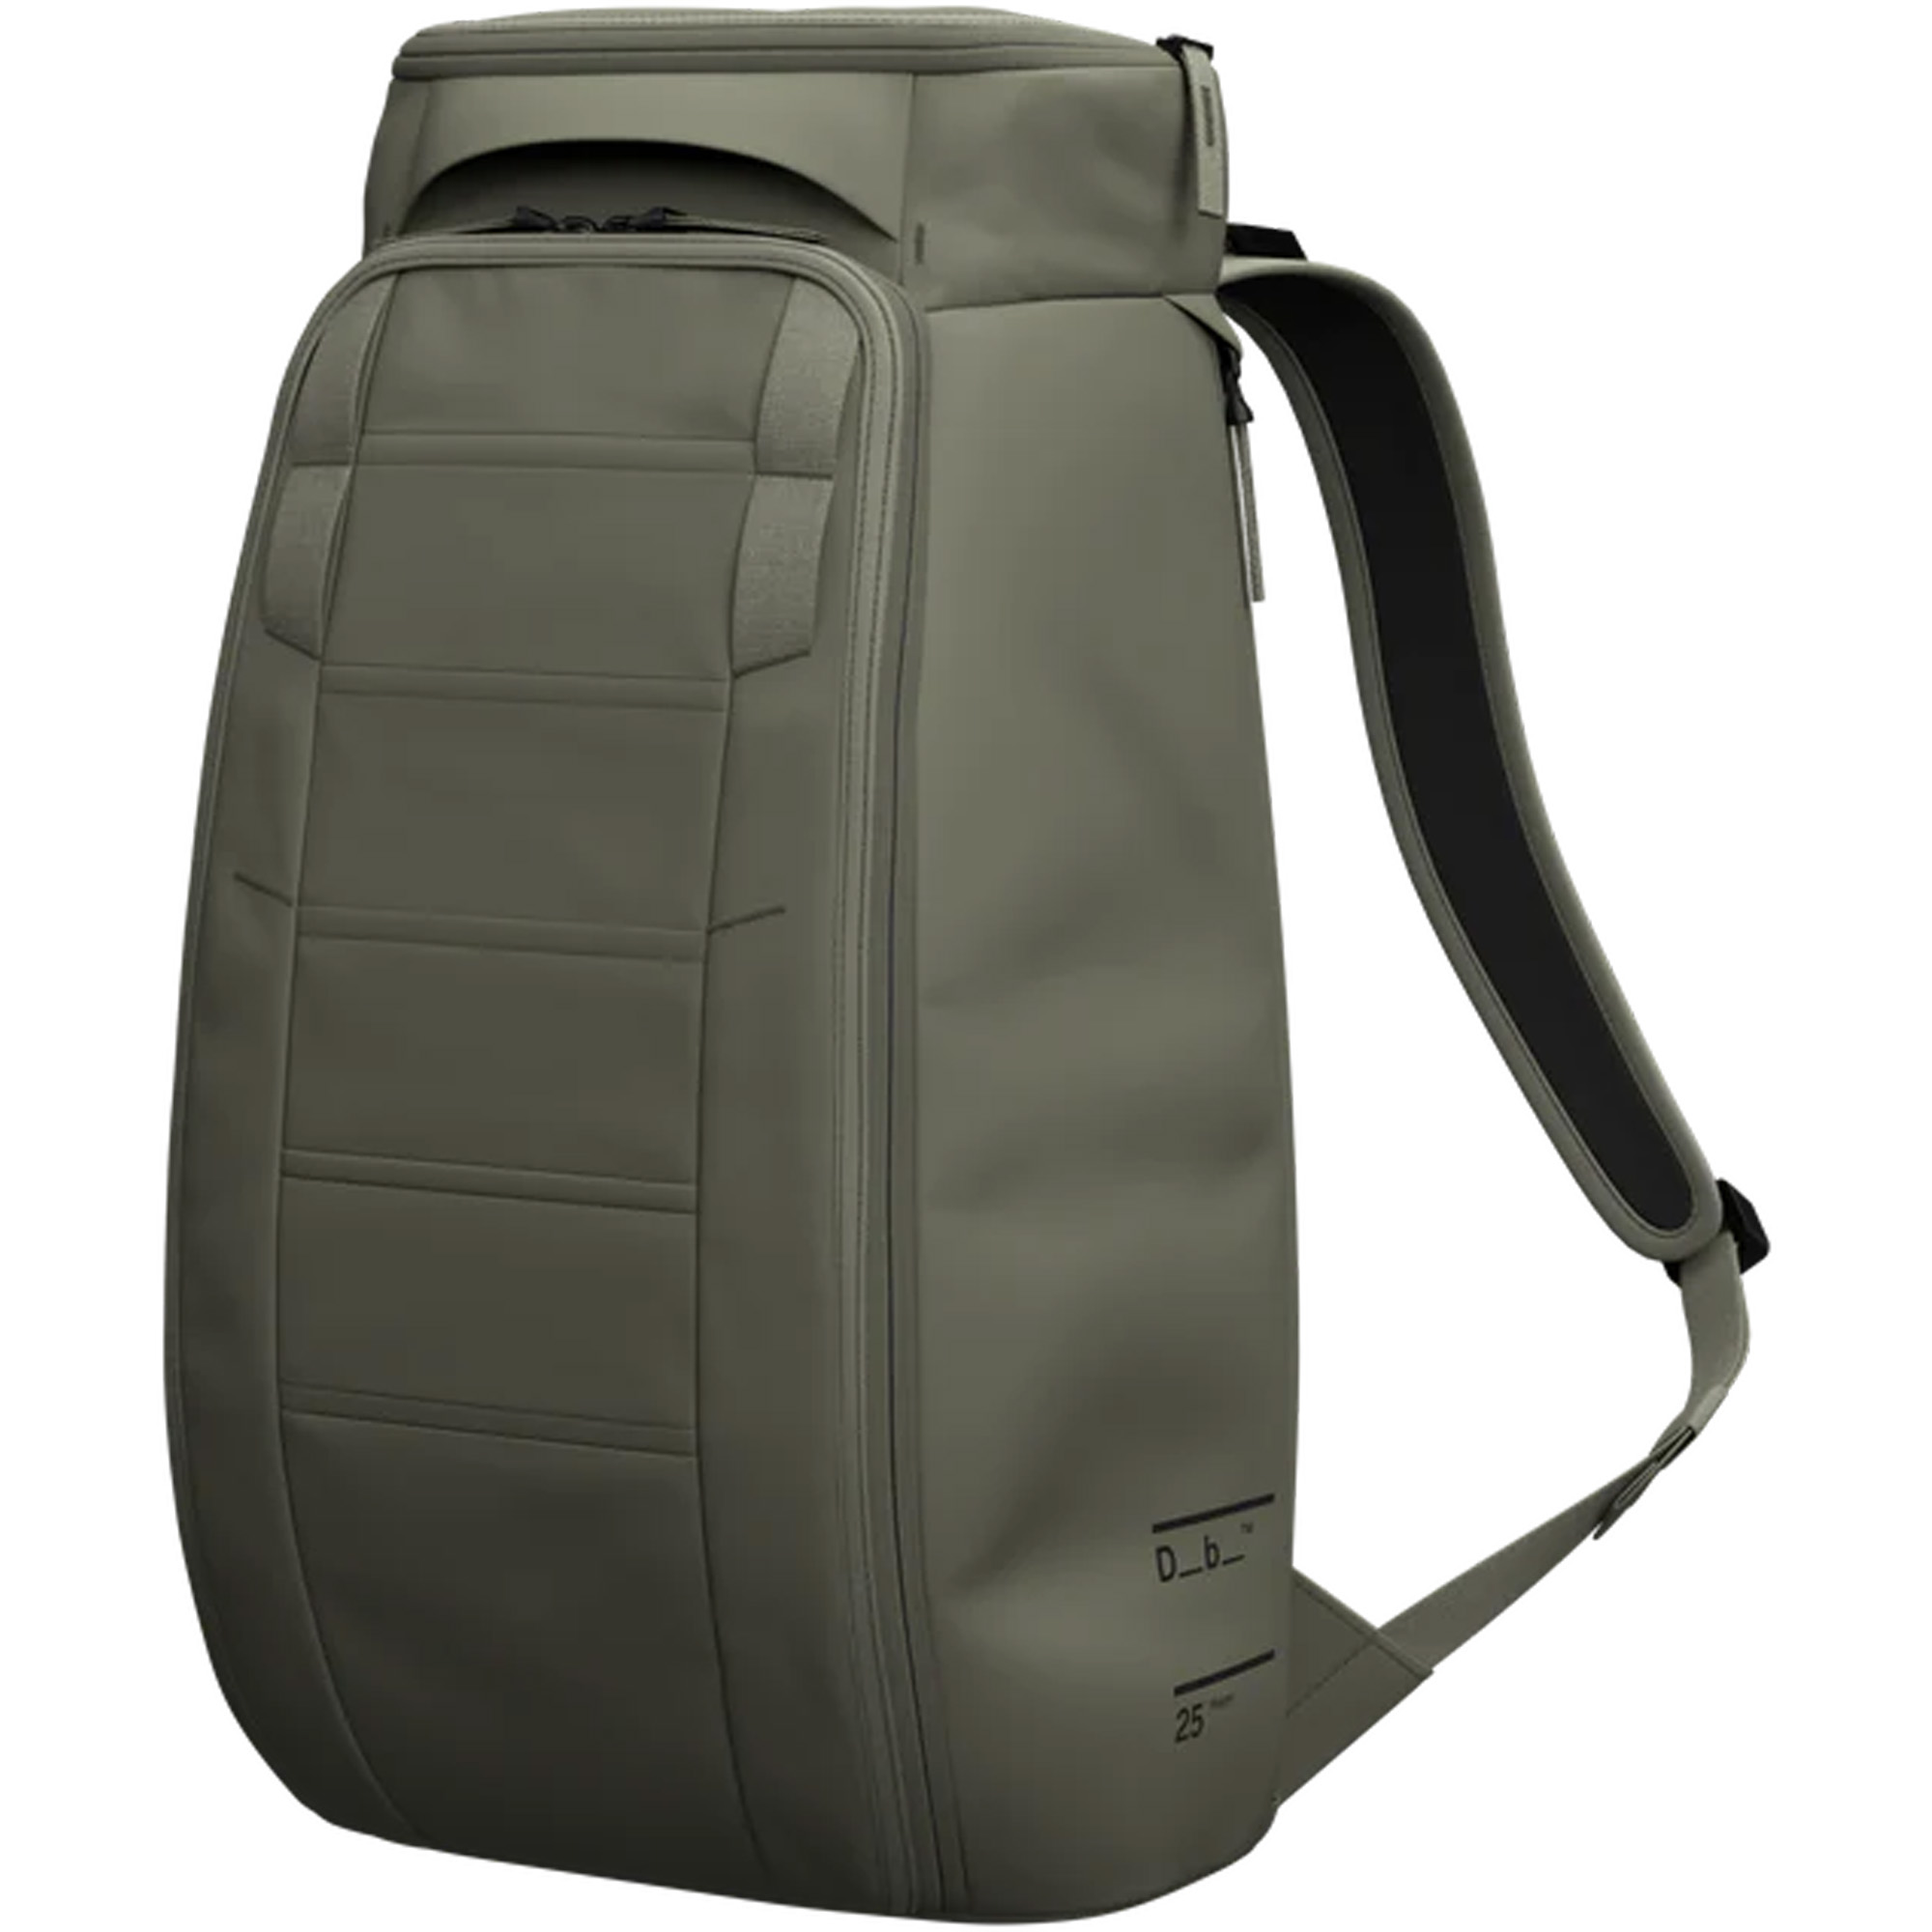 Photos - Backpack Db Hugger 25L Day Pack/, 25 Litres Moss Green 1000175200601